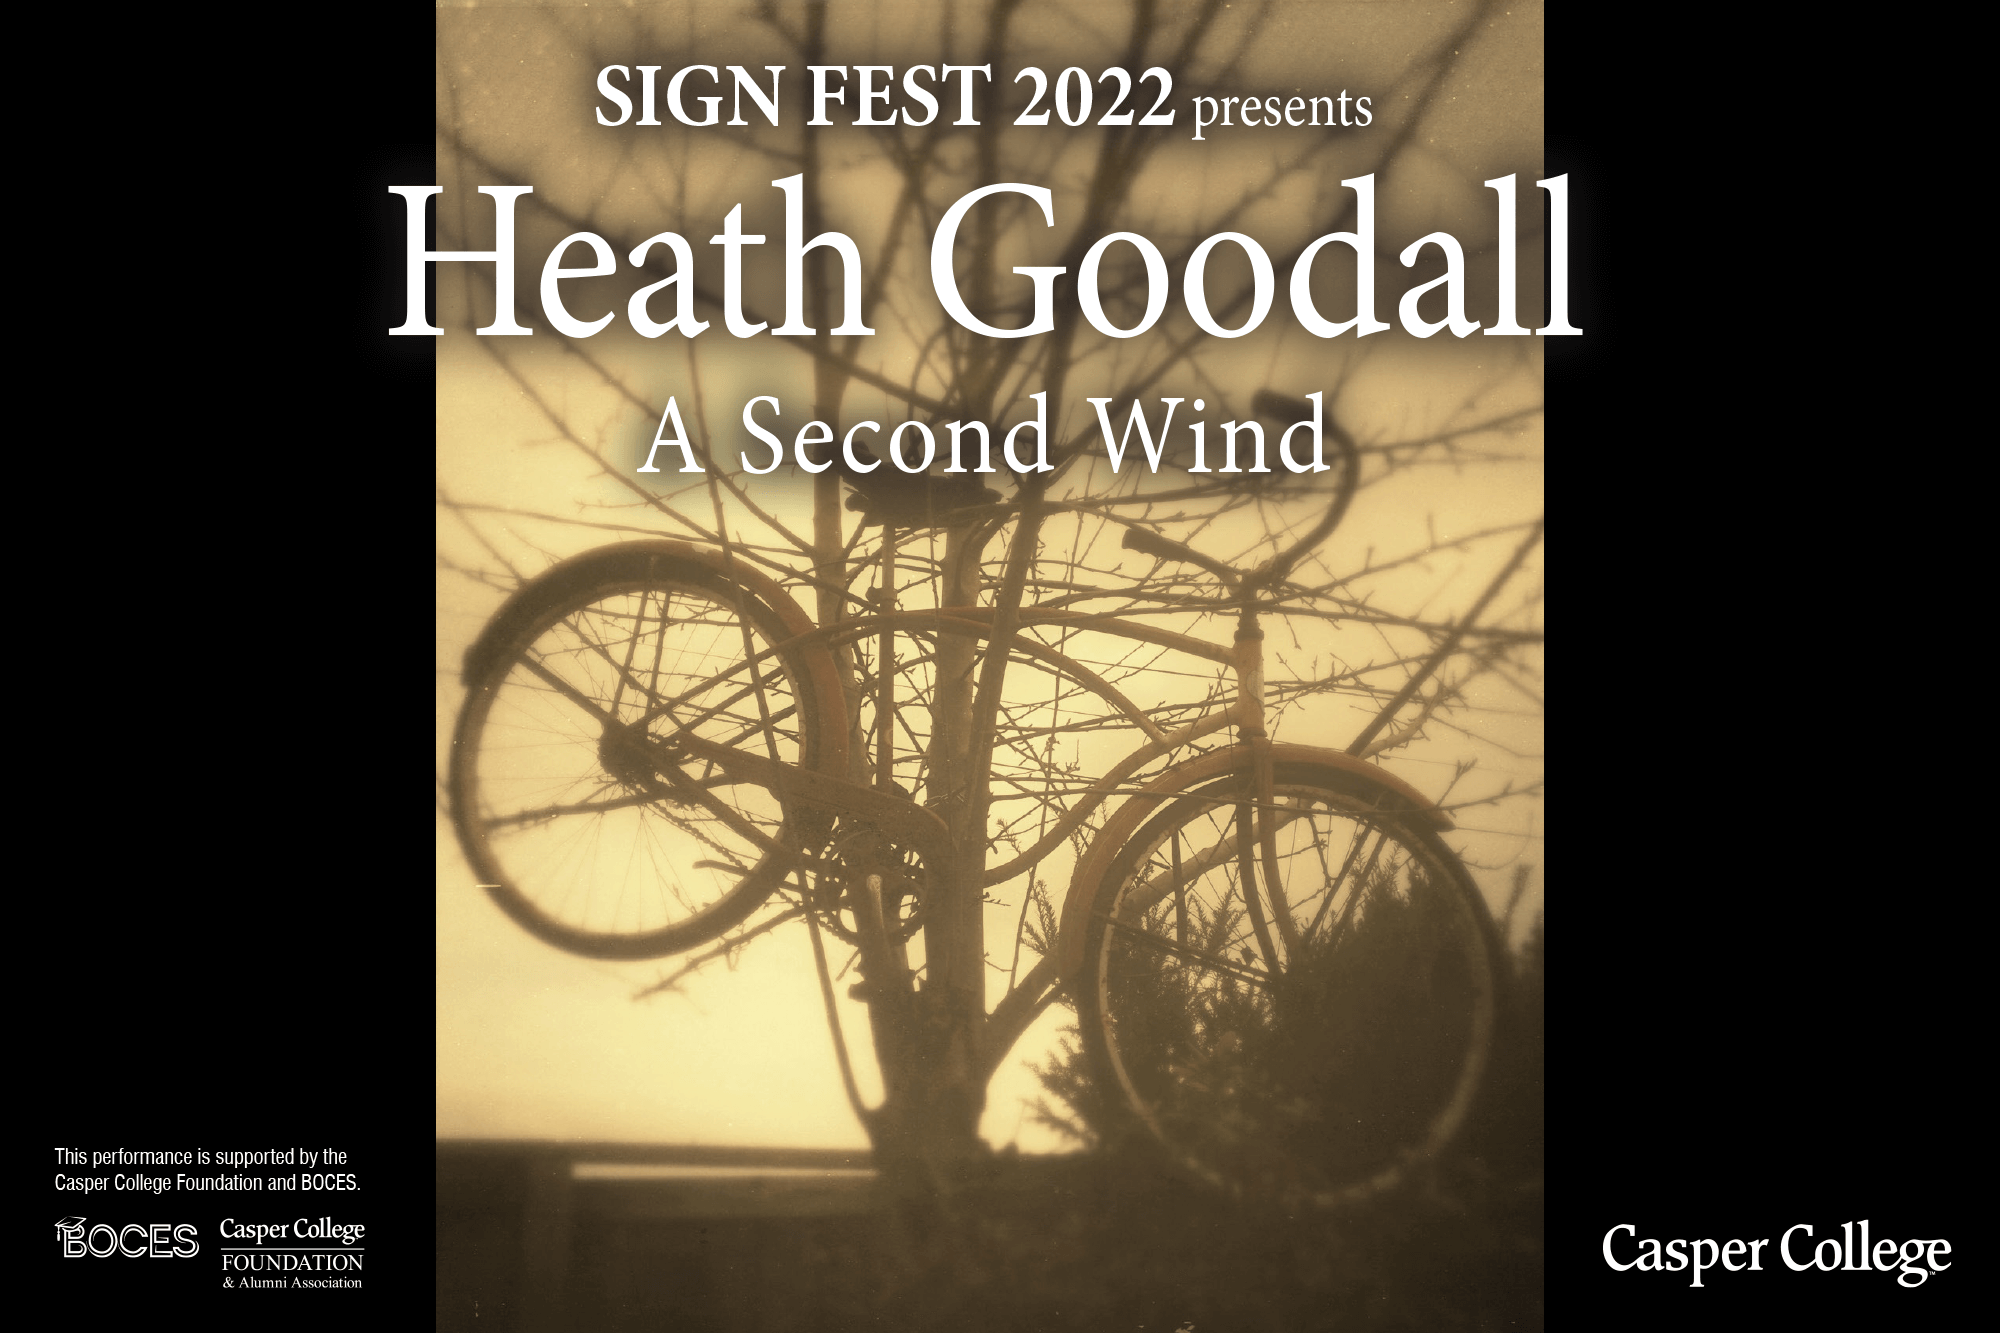 Image for Heath Goodall event.